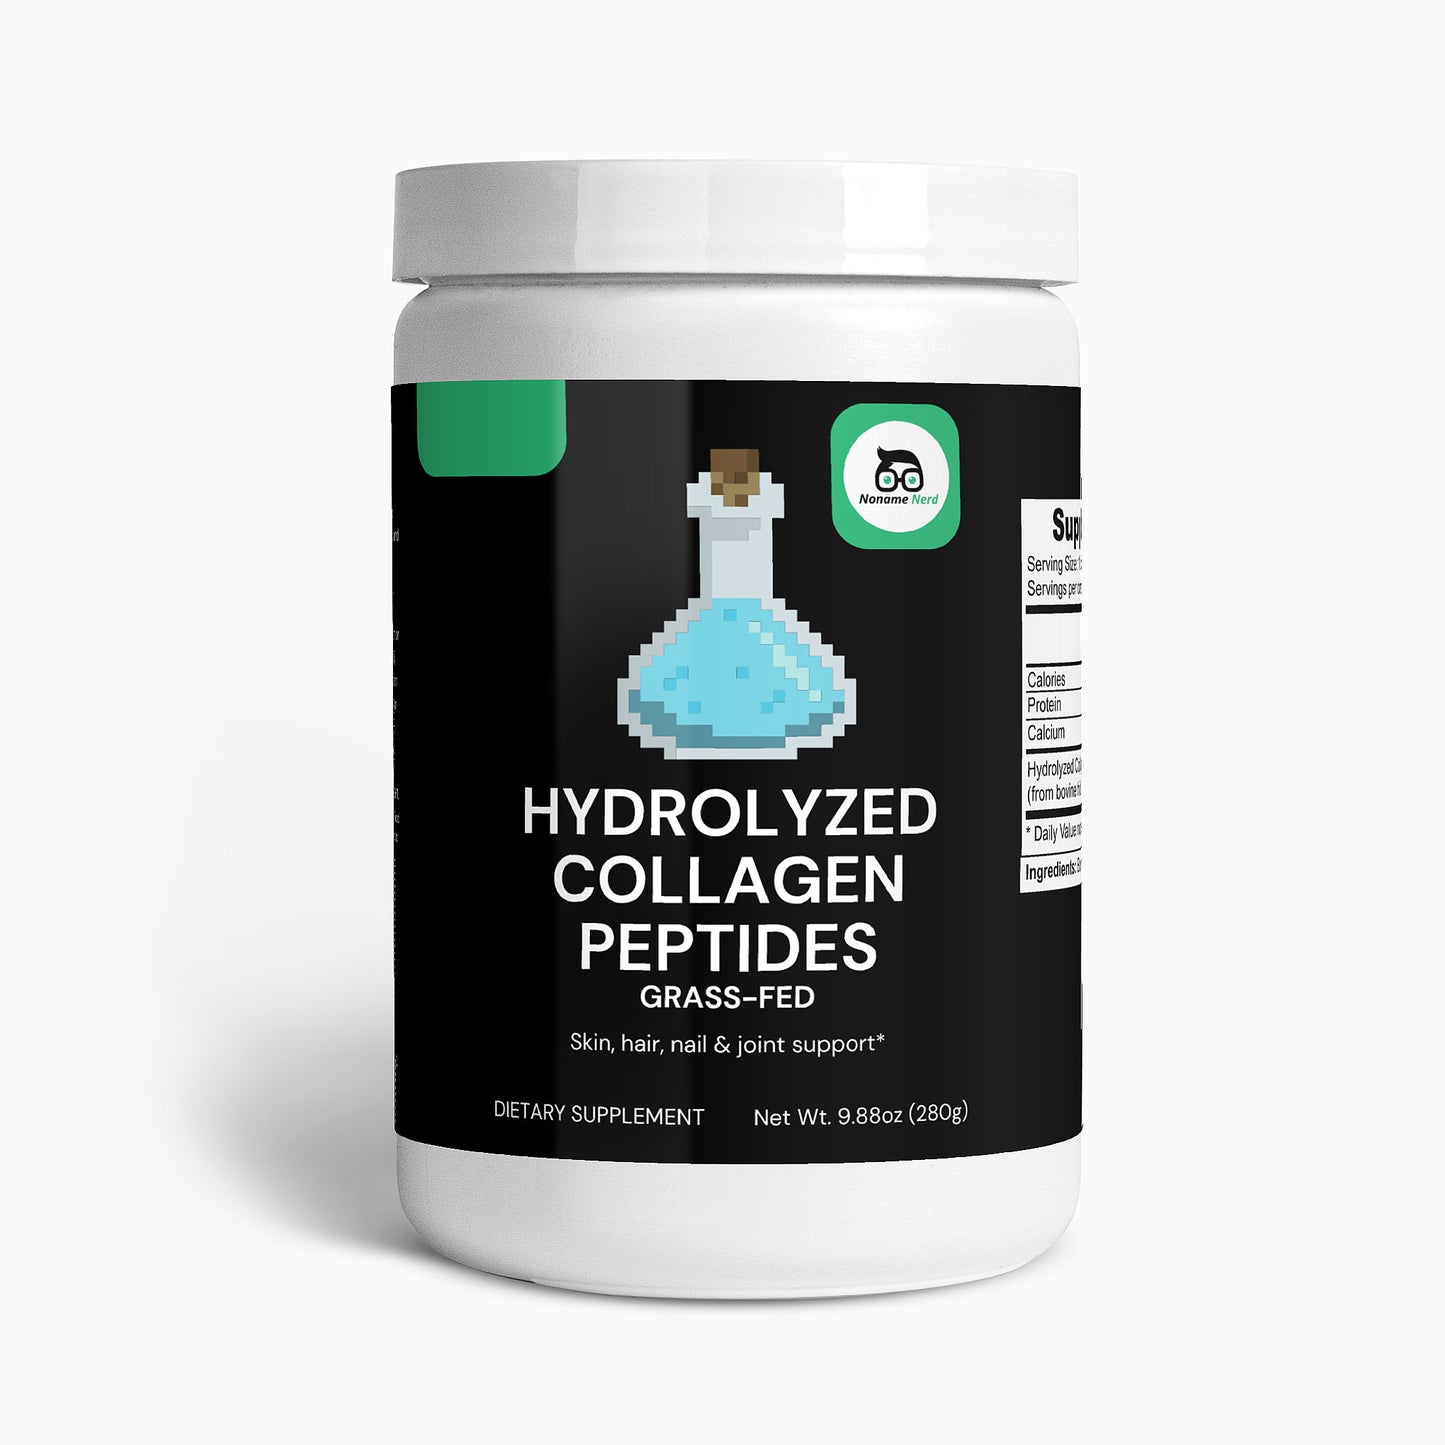 Noname Nerd Grass-Fed Hydrolyzed Collagen Peptides